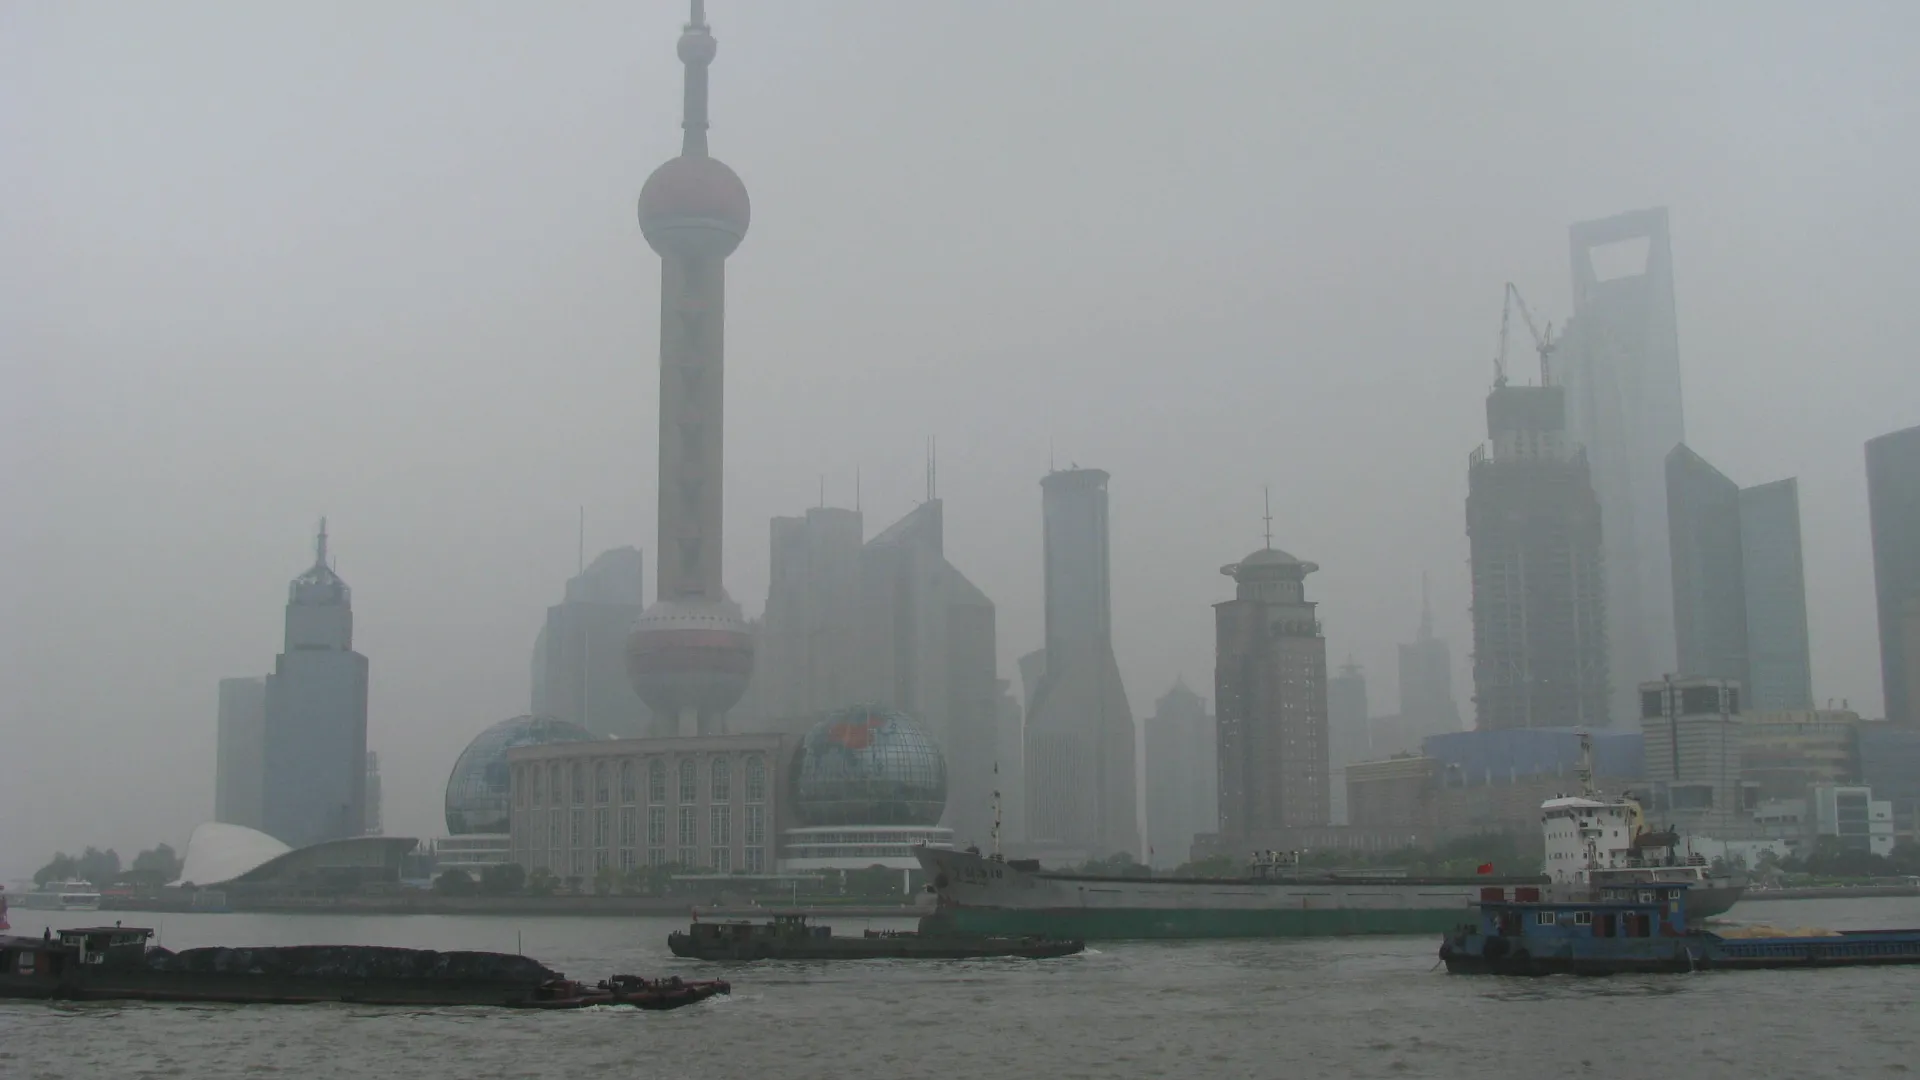 The Shanghai skyline shrouded in heavy smog, June 2008. China’s environmental challenges brought by a rapidly expanding economy will be the topic of the first Modern China Lecture on Tuesday, followed by a presentation on why Chinese dissidents backed former President Donald Trump on Thursday. Both talks will be on Zoom. Photo: Peter Dowley/Wikimedia Commons